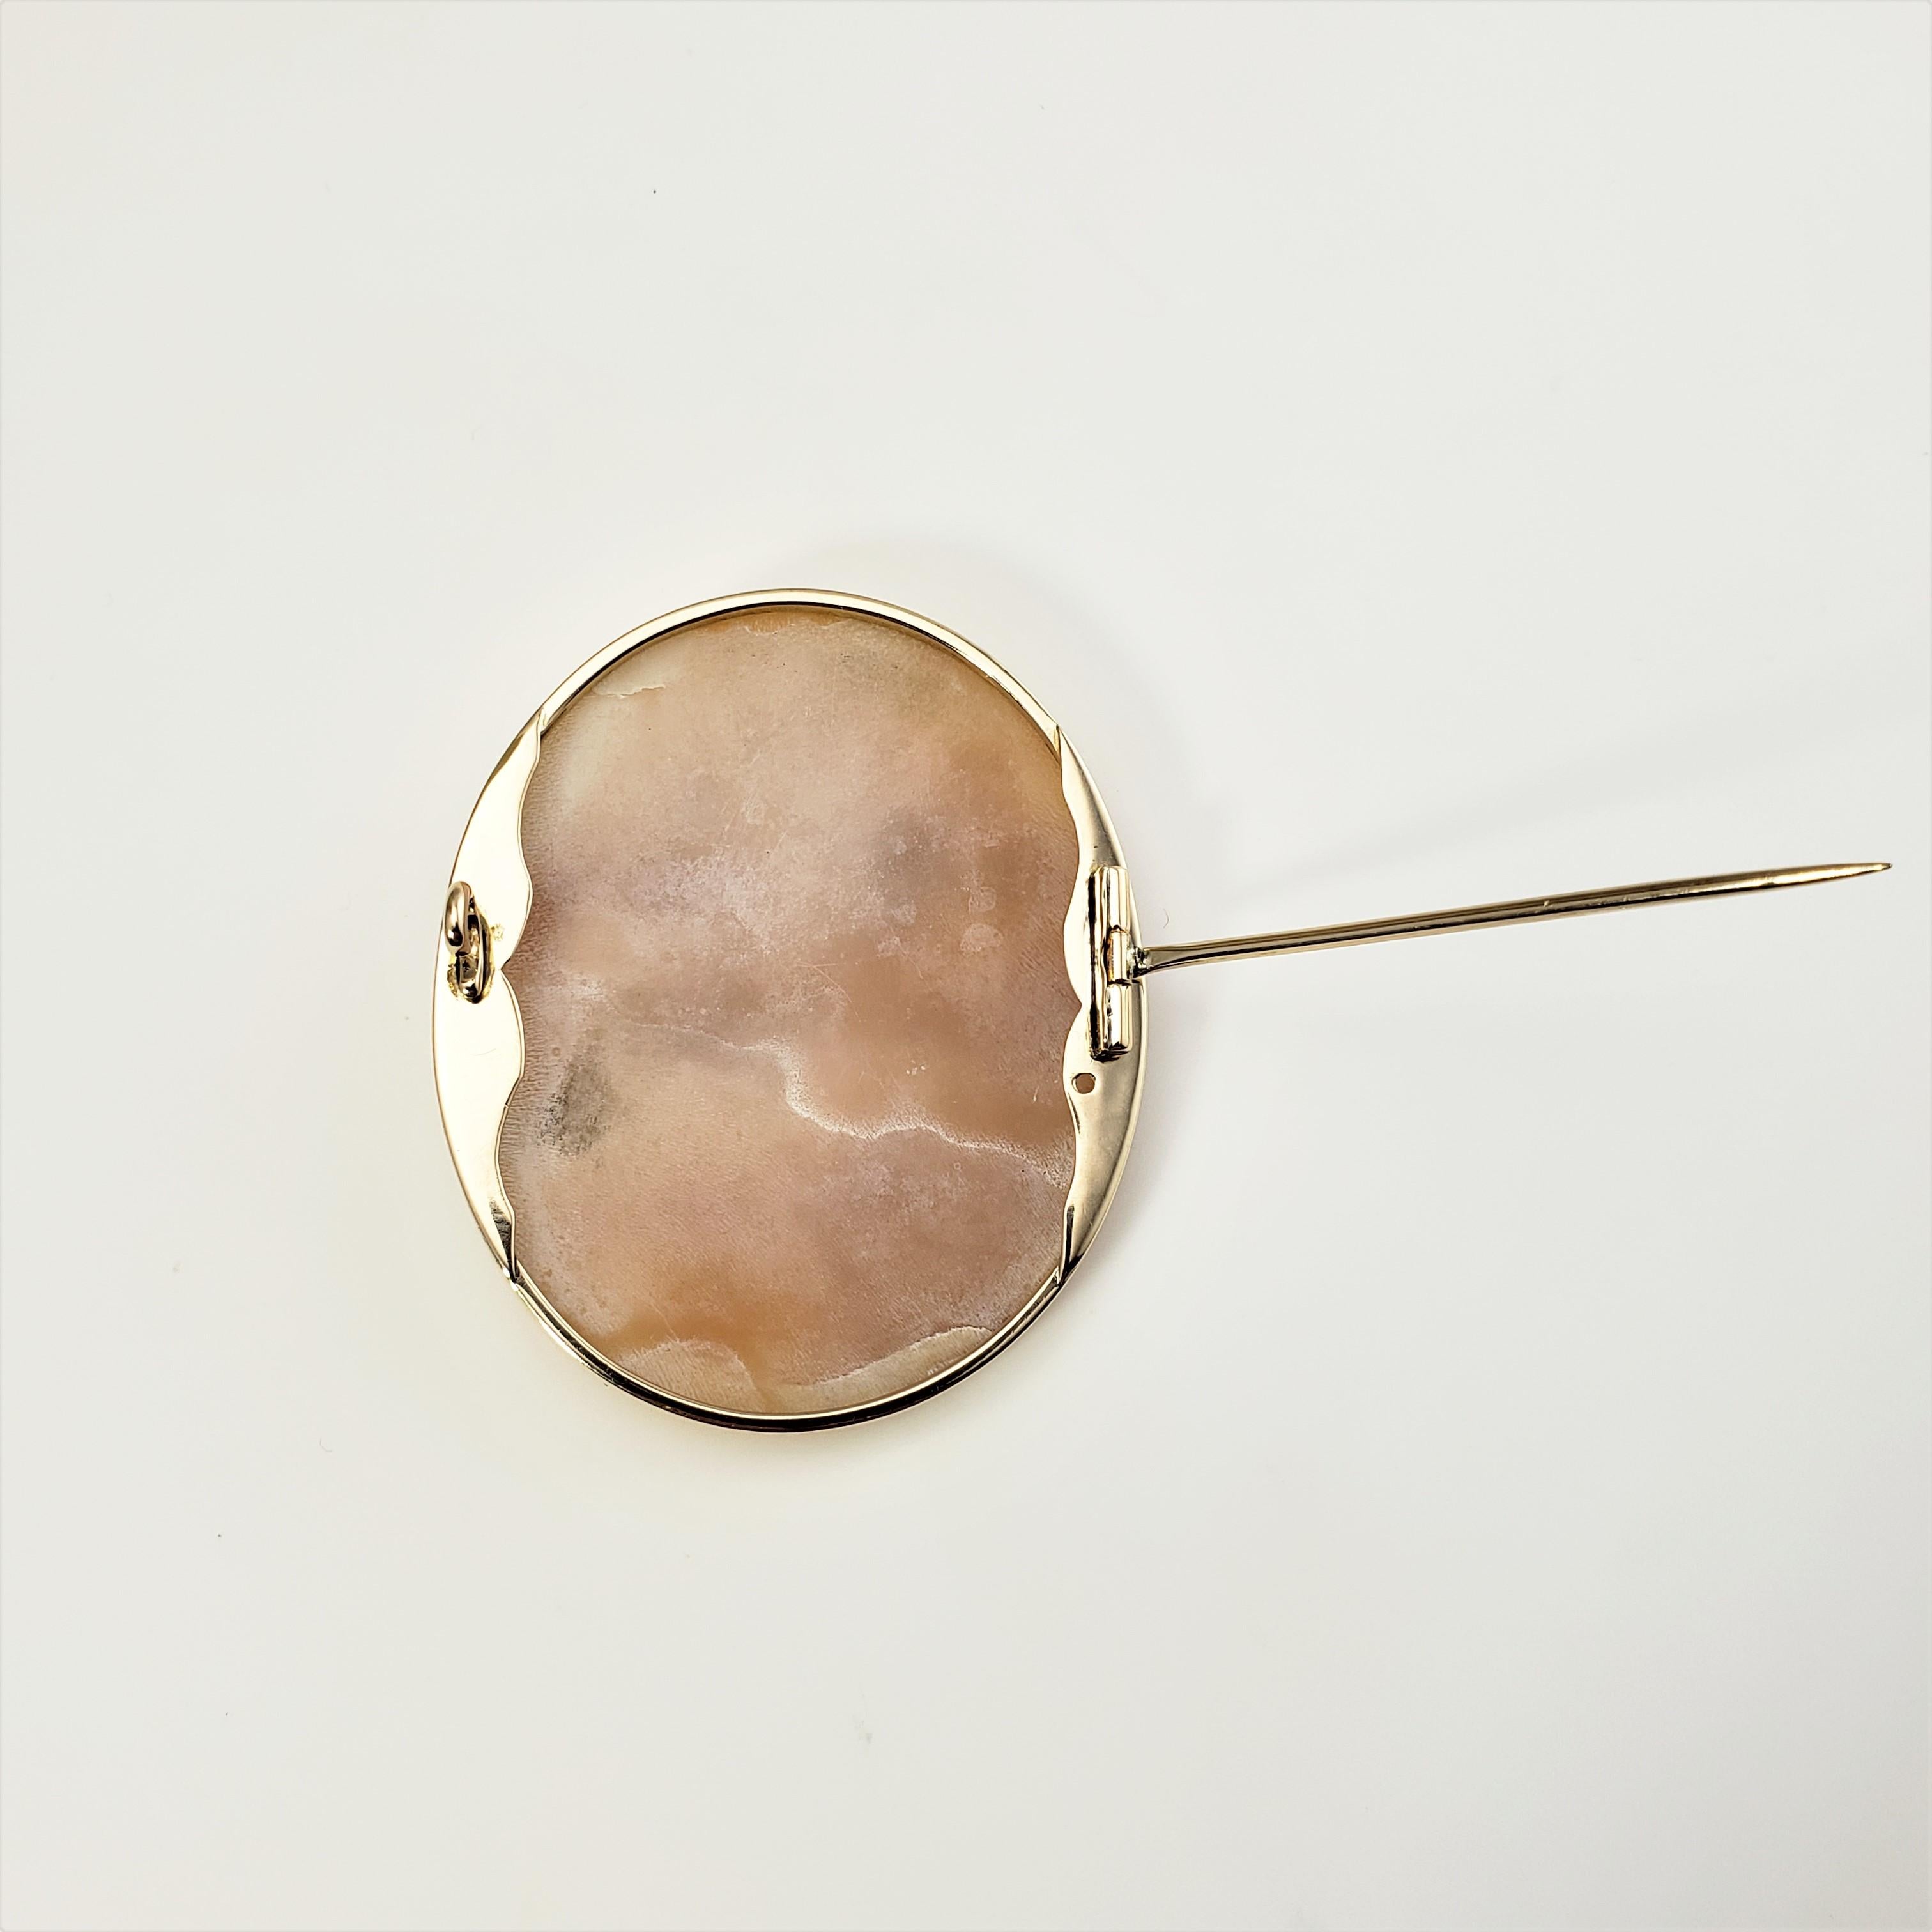 10 Karat Yellow Gold Cameo Brooch/Pin For Sale 2